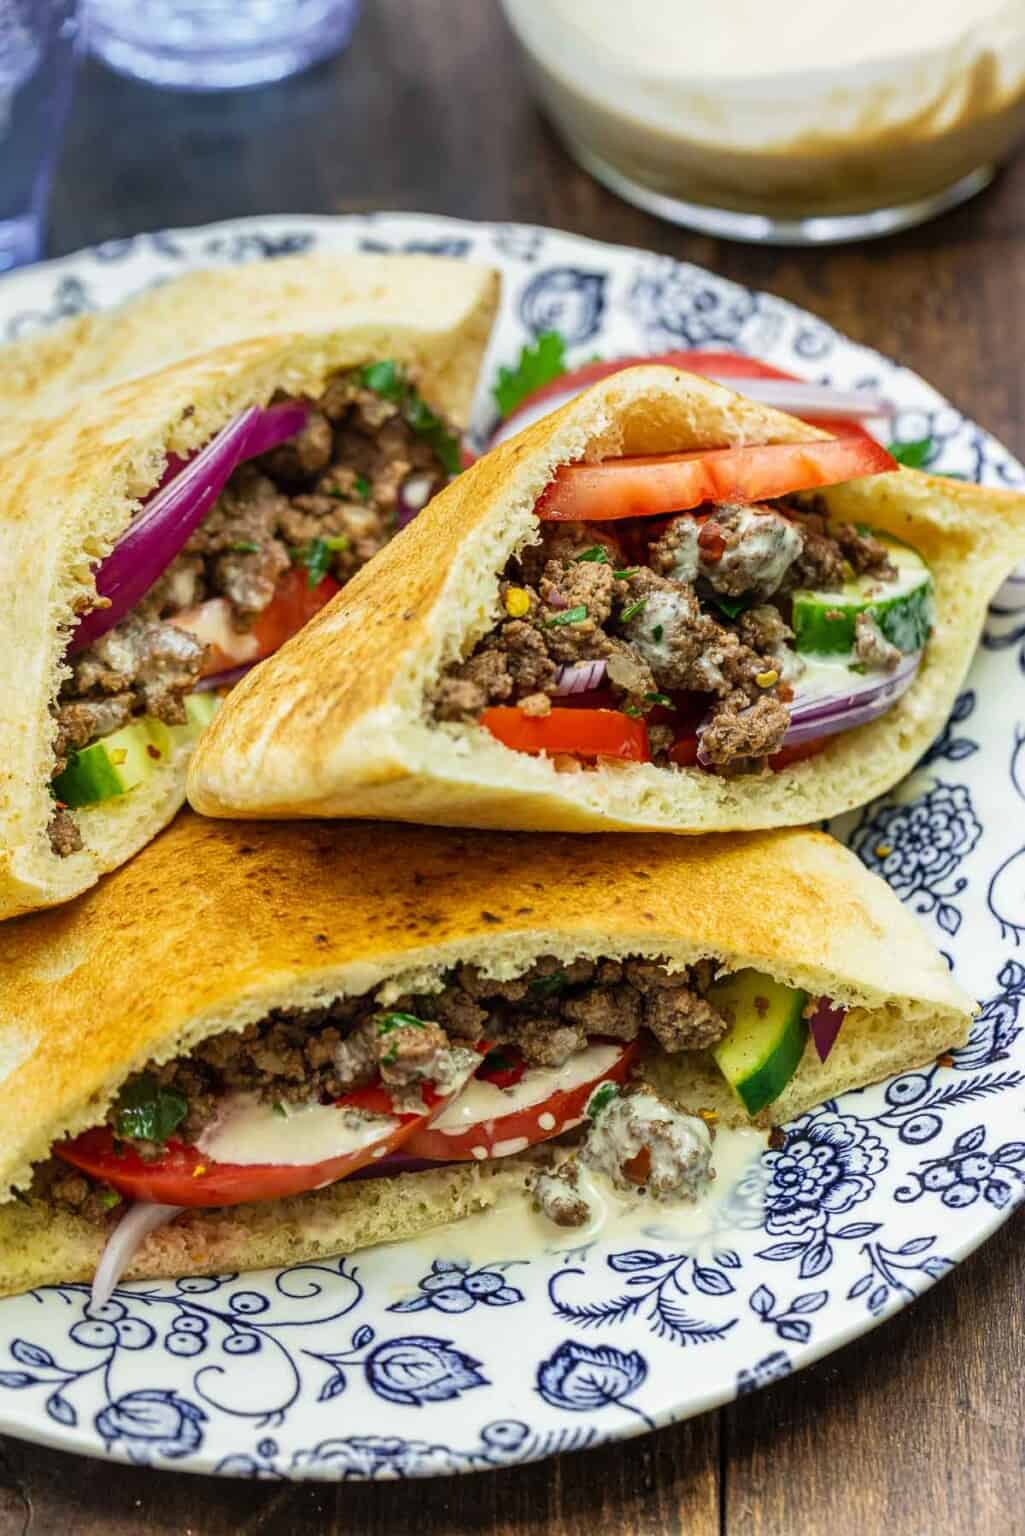 Delicious Ground Beef Pita Sandwich with Seasoned Ground Beef, Cucumbers, Red Onions, tomatoes, and Tzatziki Yogurt Sauce on Blue Floral and White Plates